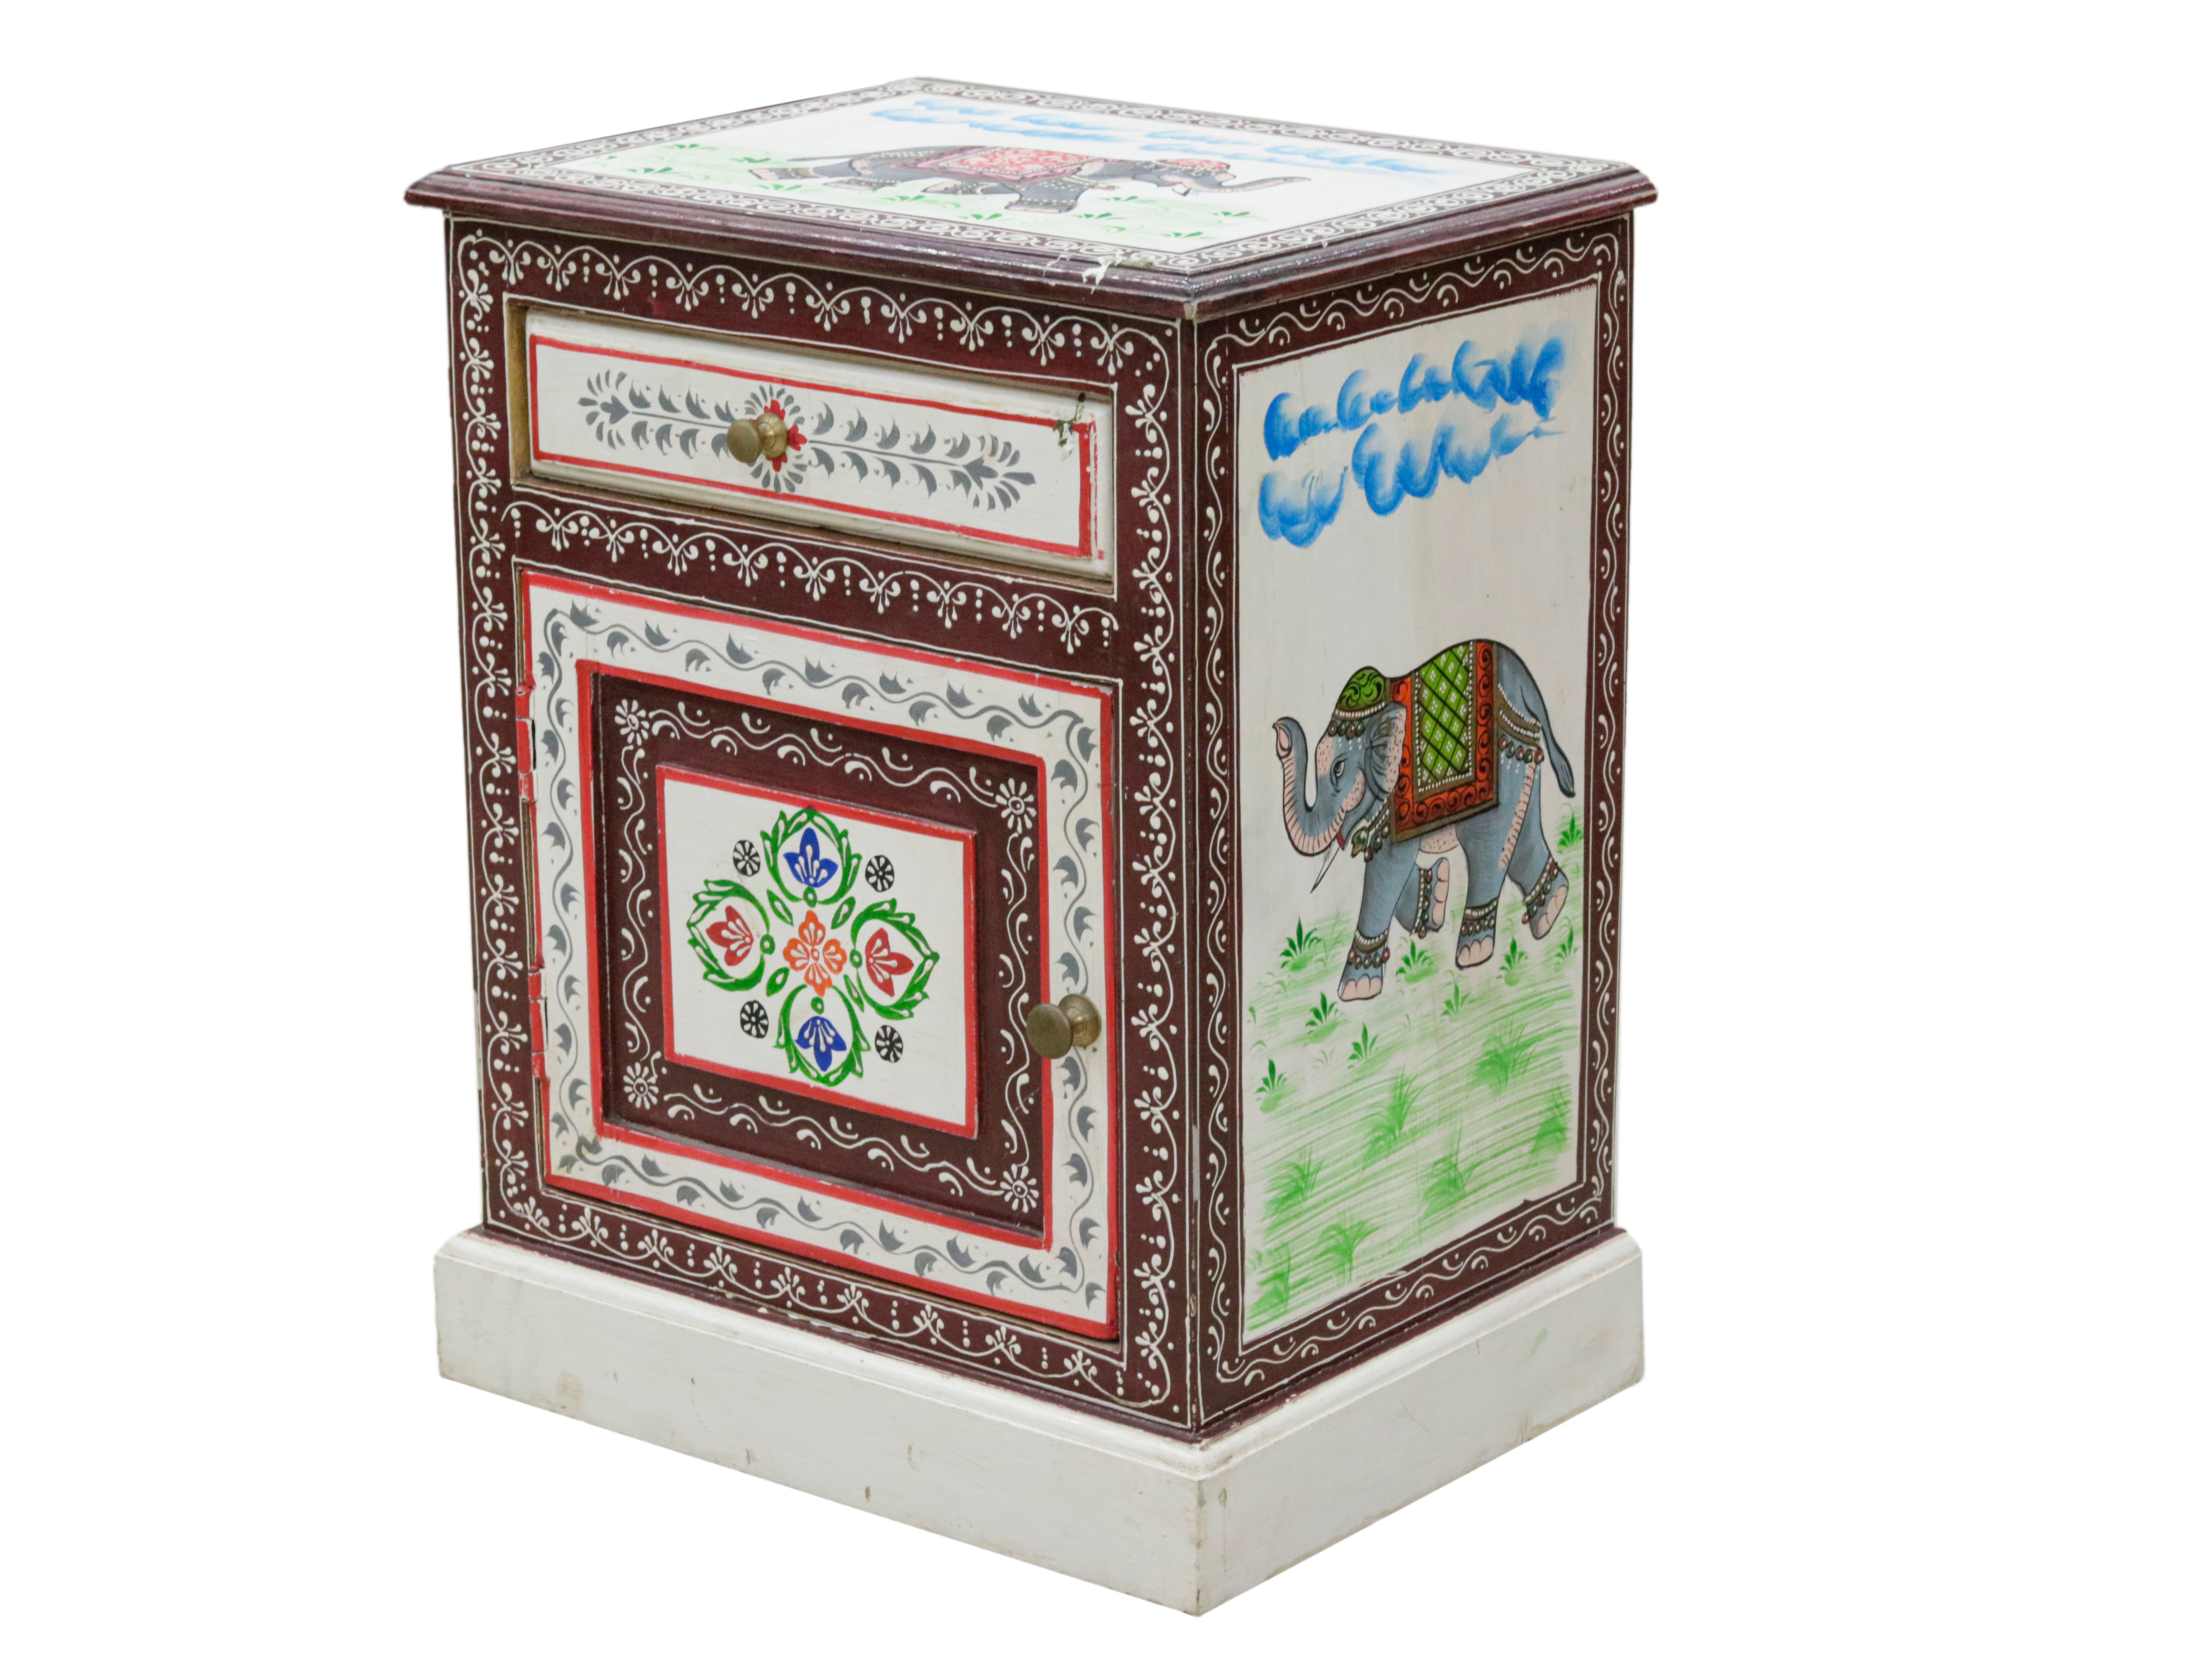 Ethnic Heritage Painted Wooden Handmade Bedside with Storage Bedside